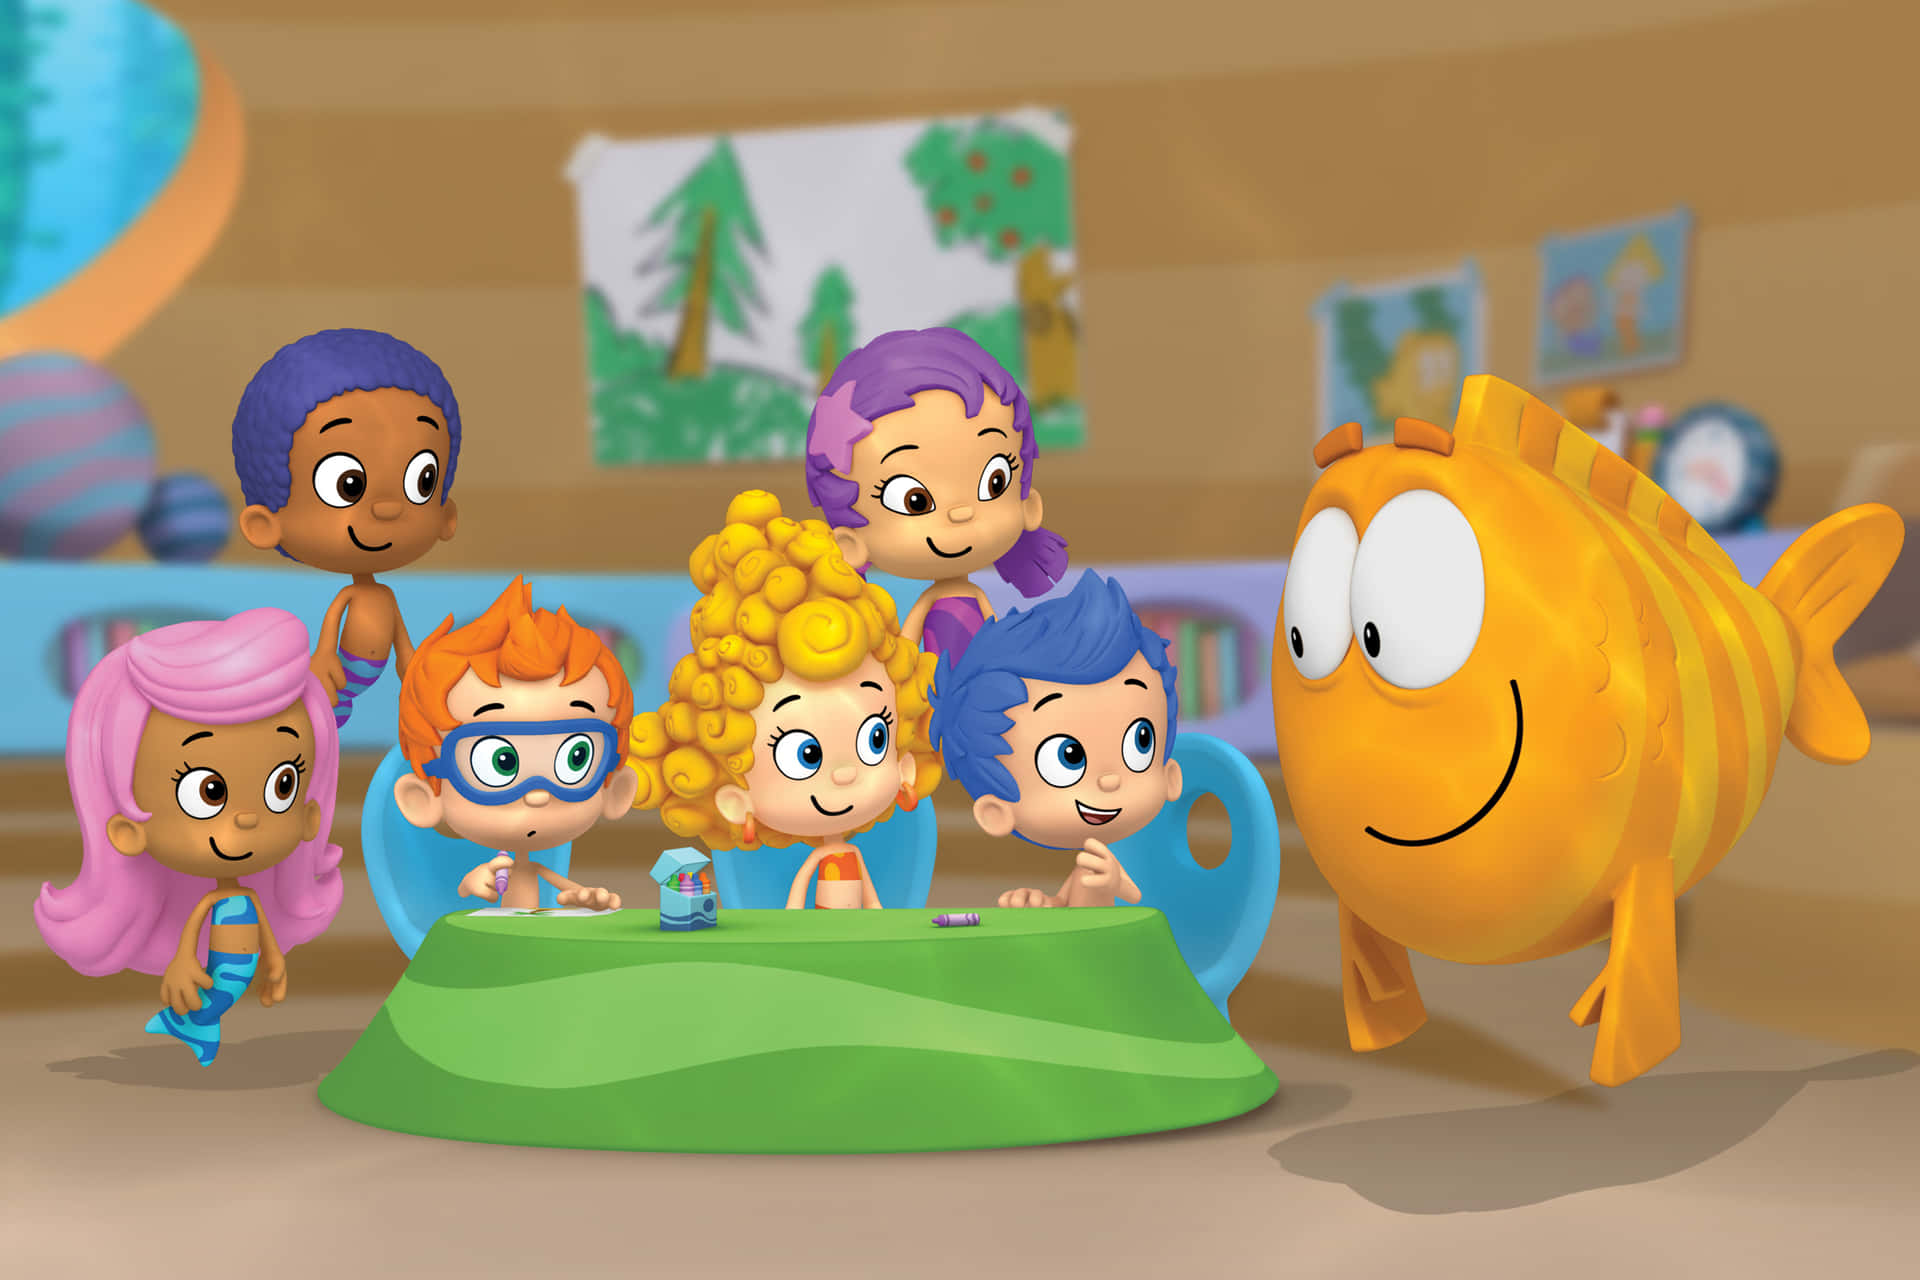 Have you met the Bubble Guppies?